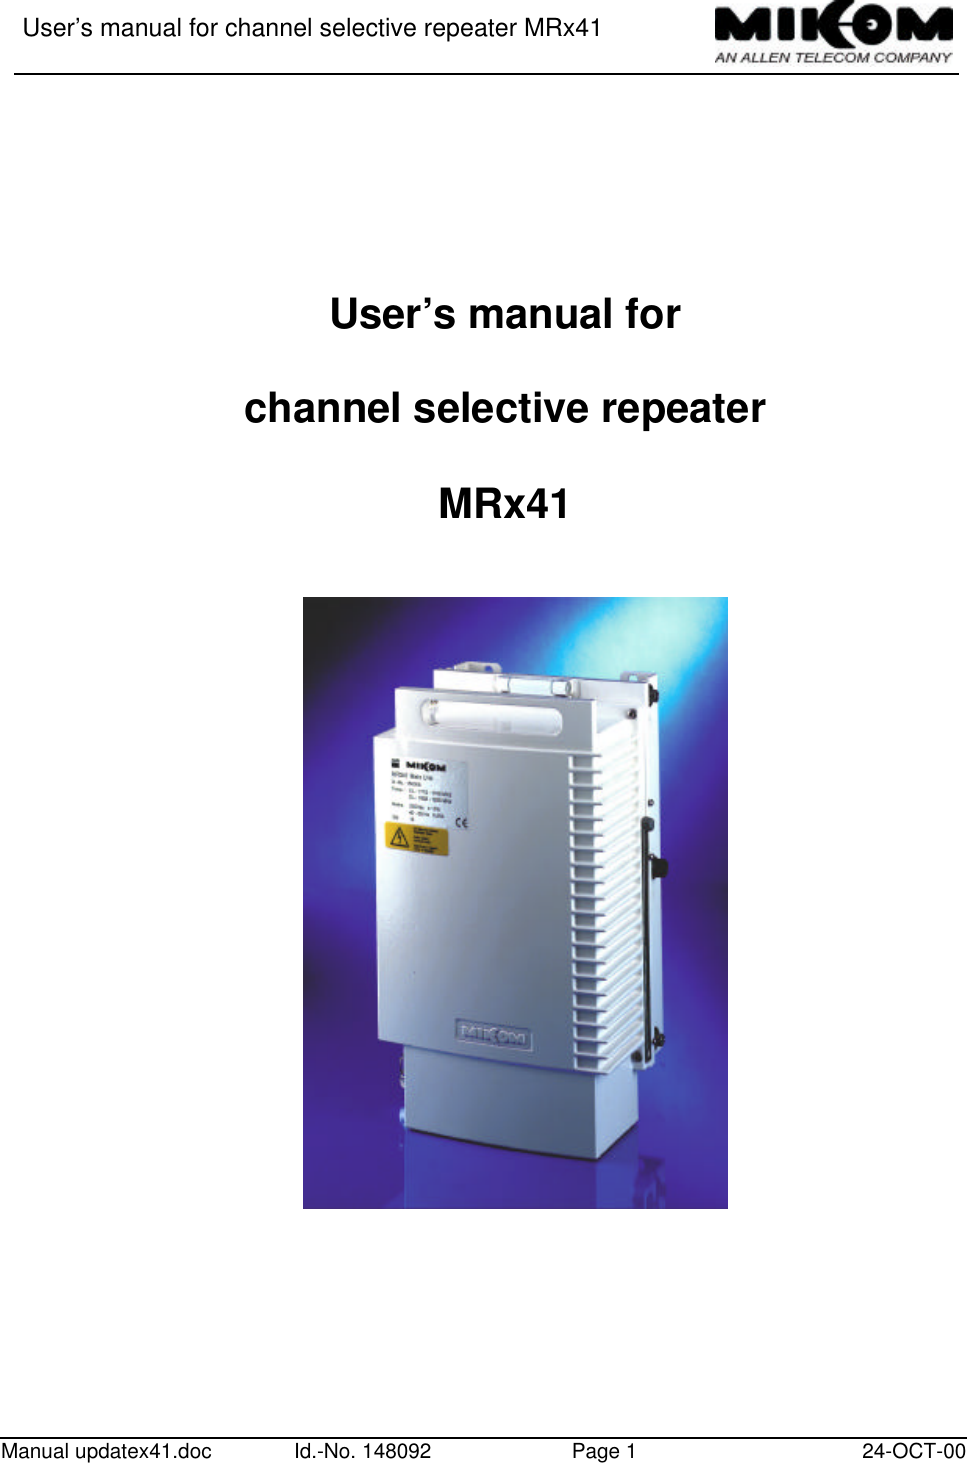 User’s manual for channel selective repeater MRx41Manual updatex41.doc Id.-No. 148092 Page 1 24-OCT-00User’s manual forchannel selective repeaterMRx41